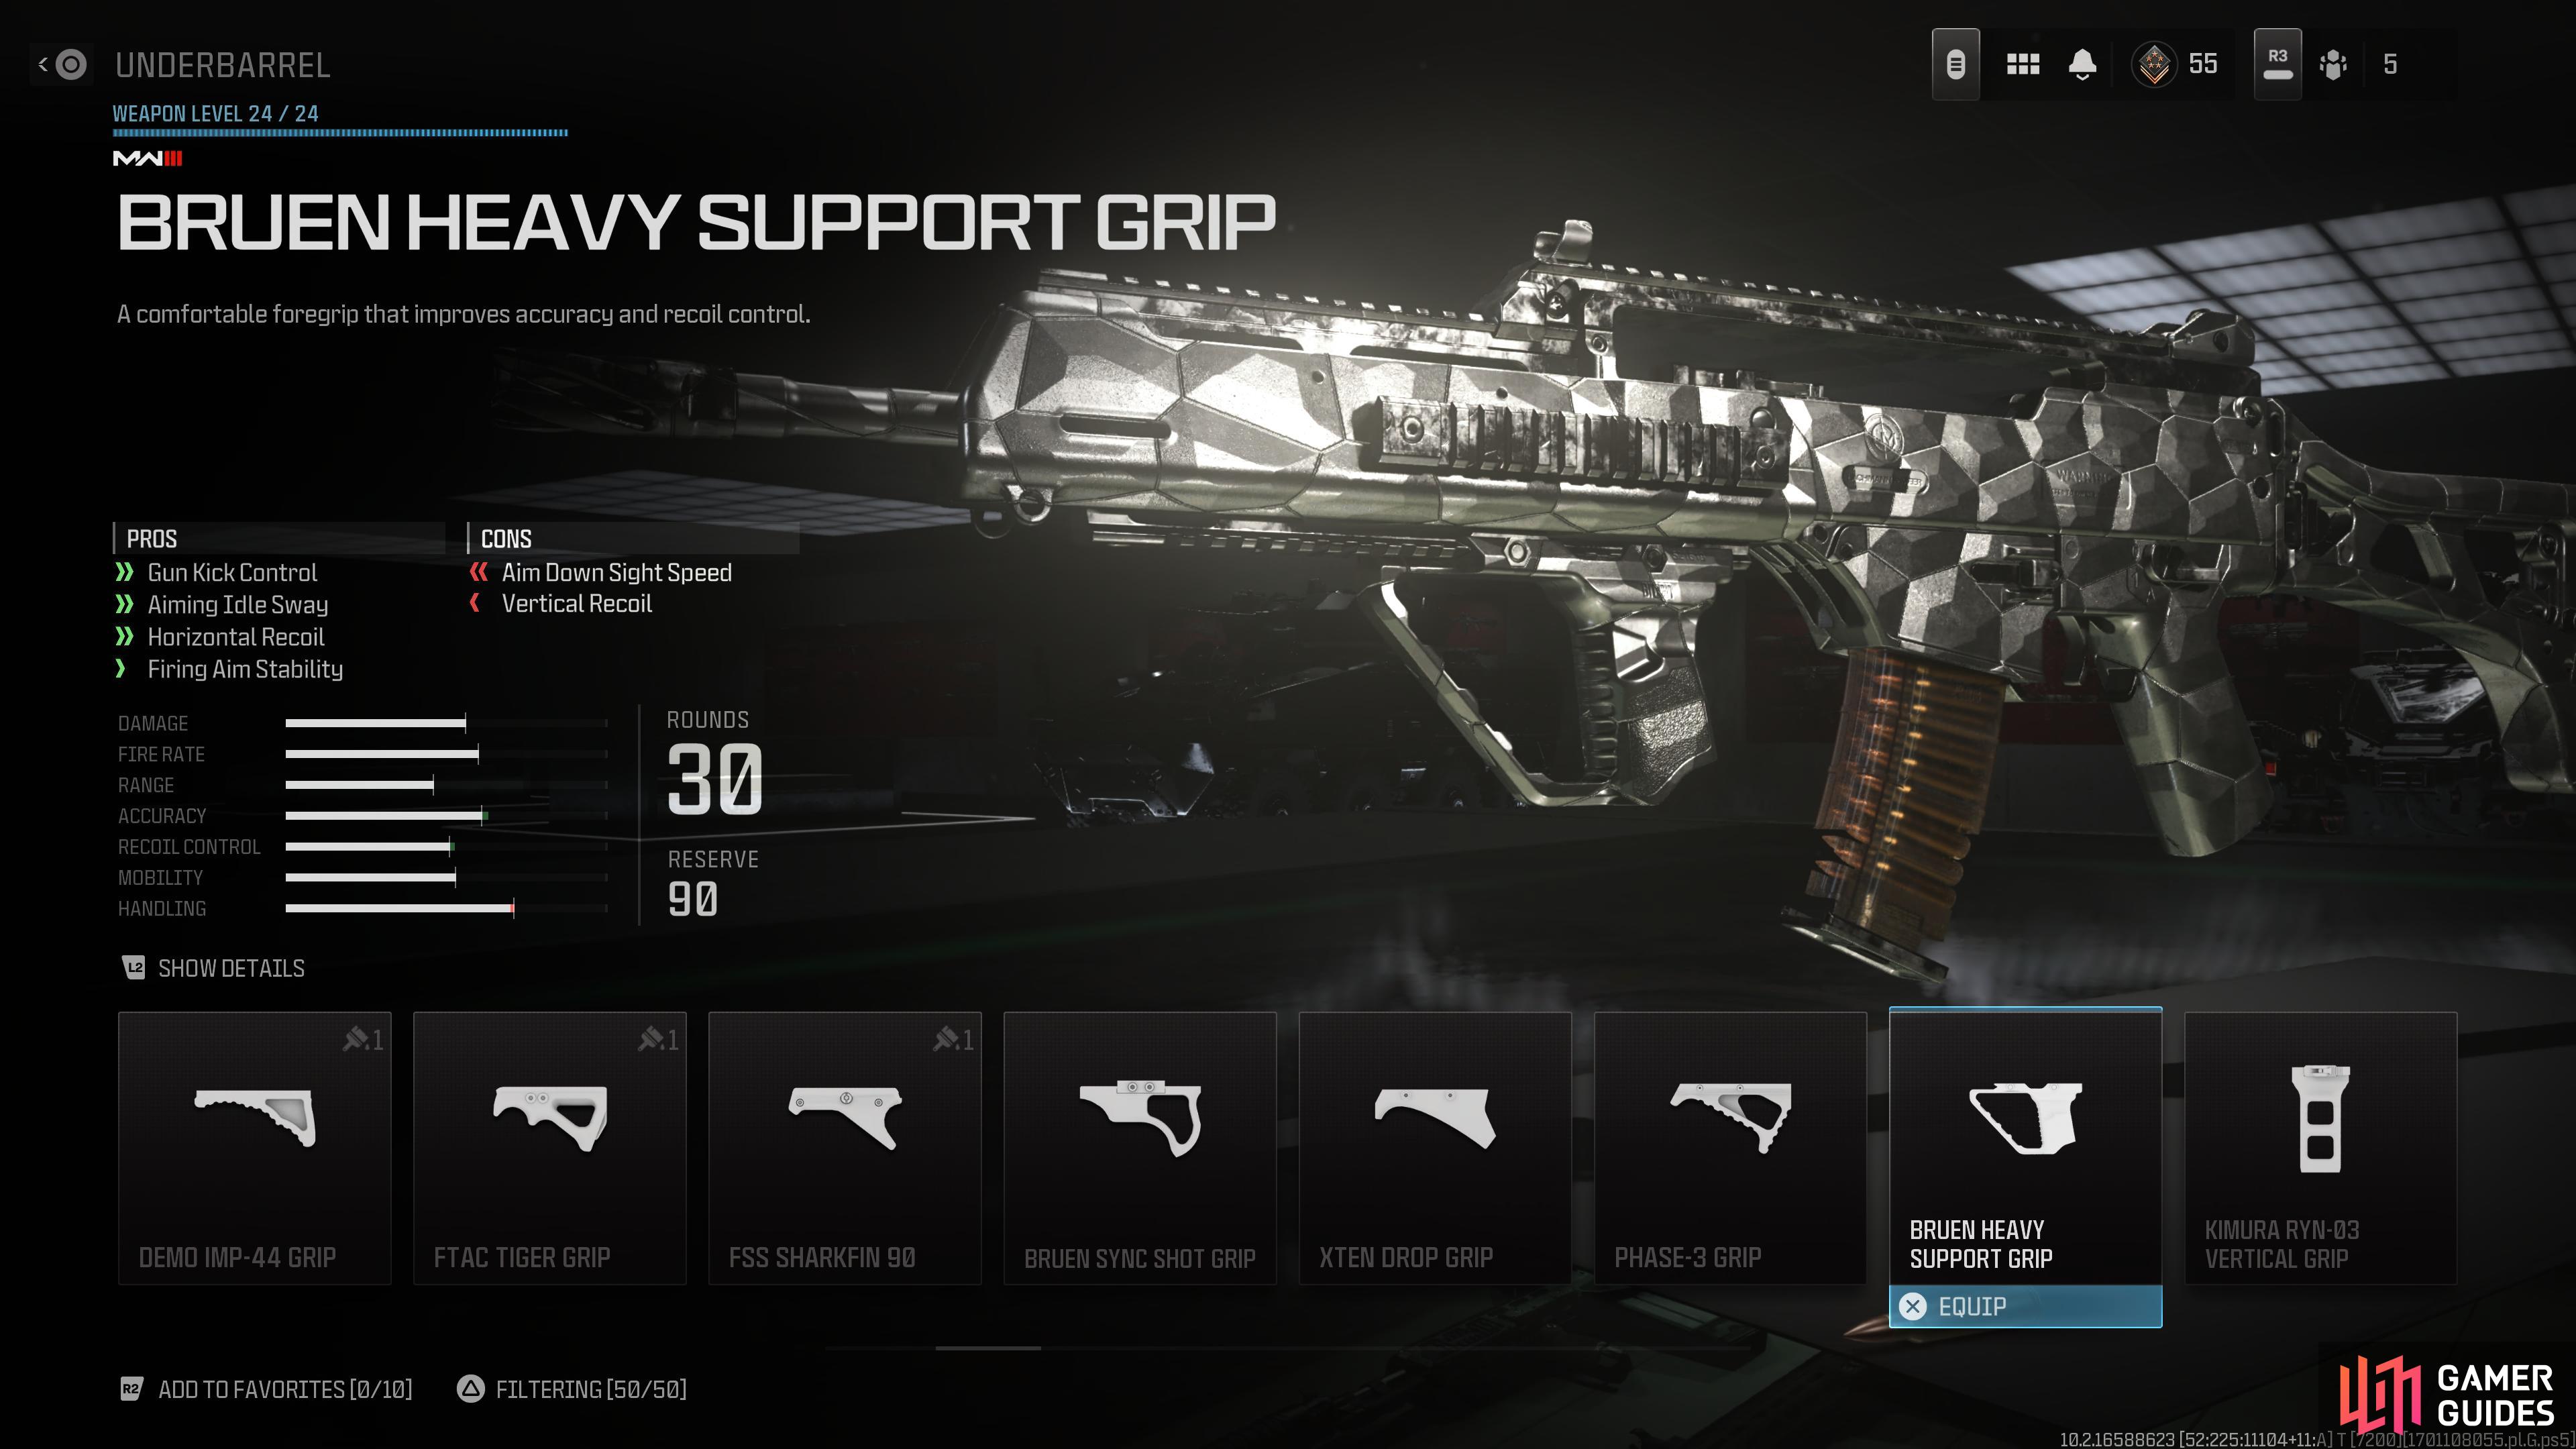 while the bruen heavy support grip is the best underbarrel for the weapon.